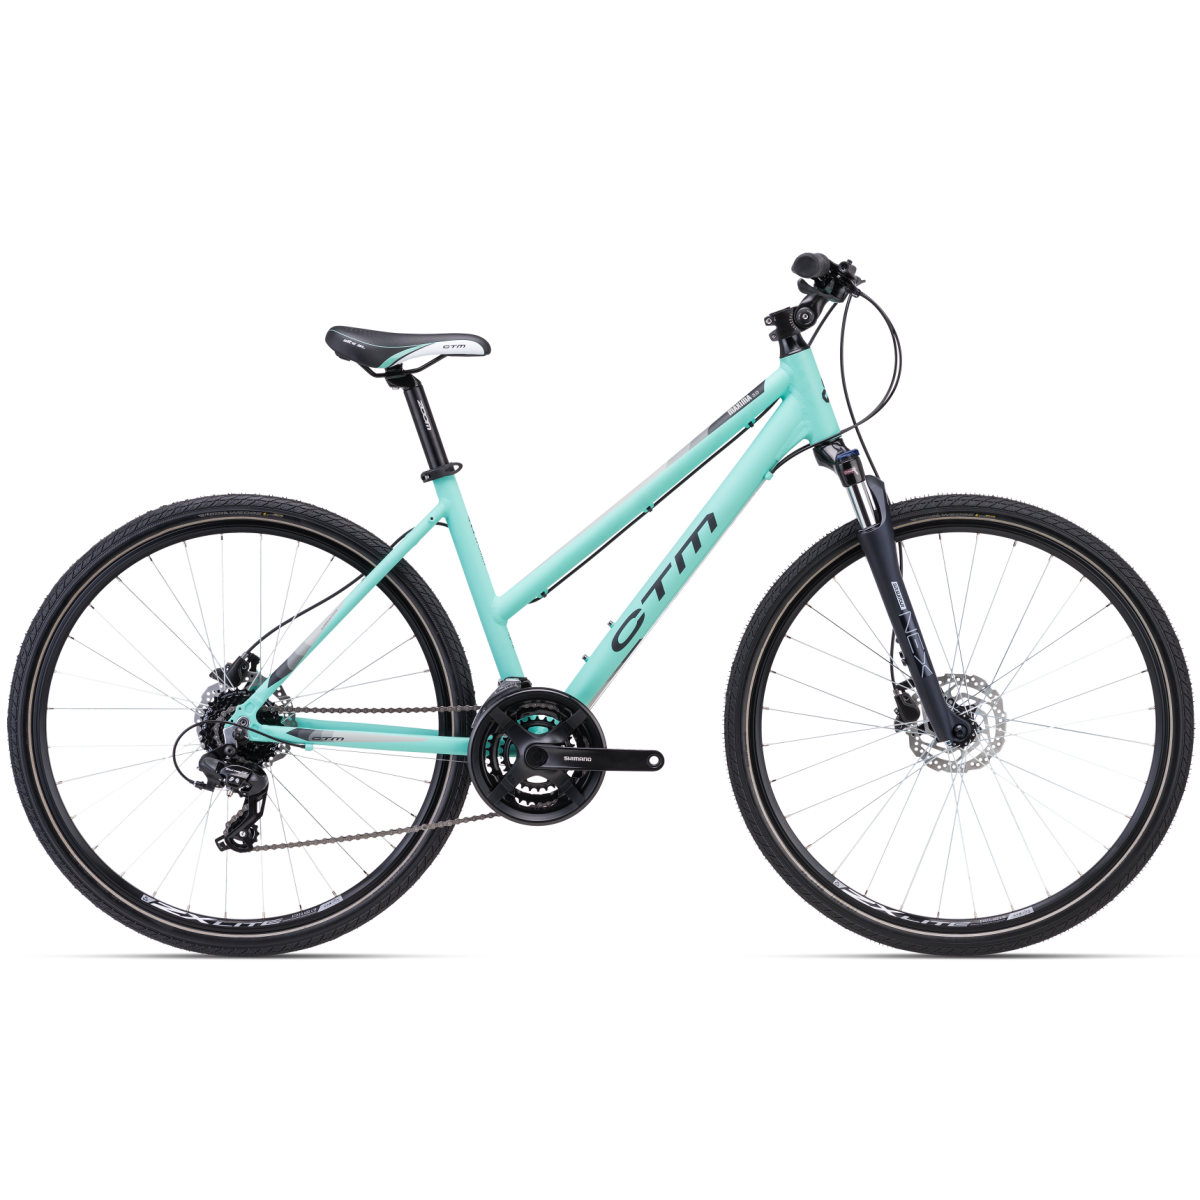 CTM MAXIMA 3.0 womens bicycle - turquoise/gray